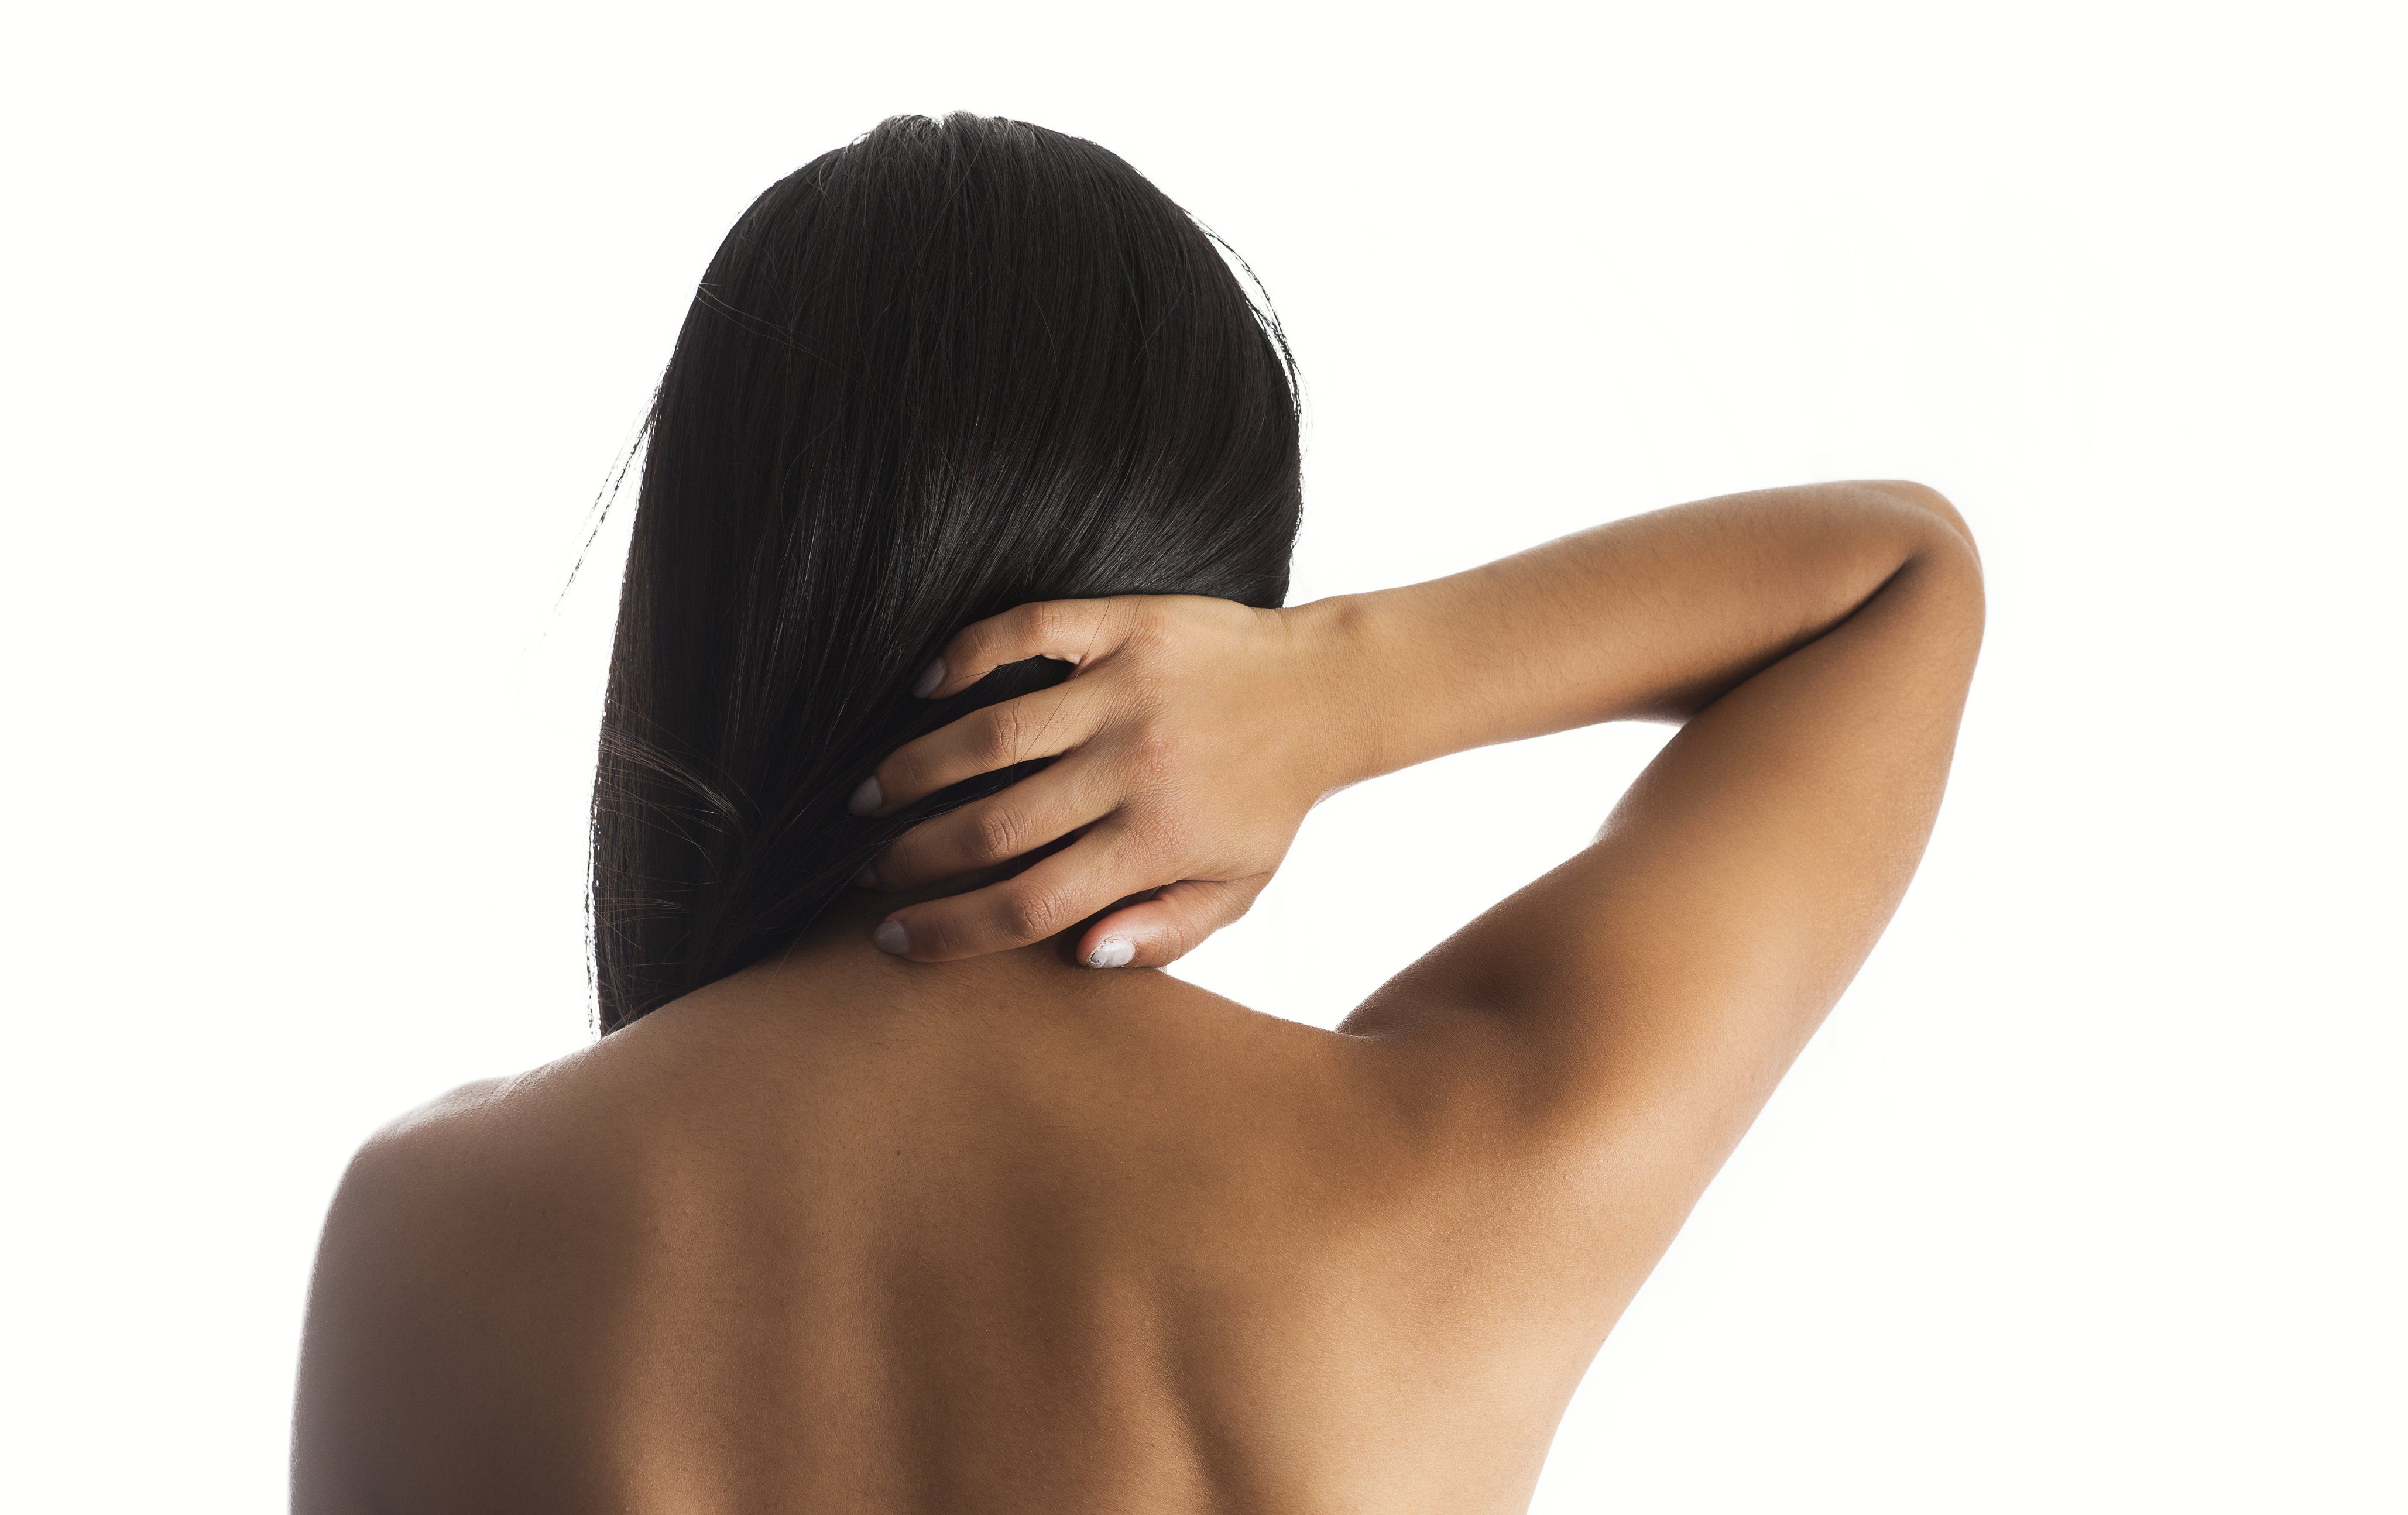 How to Find Easy Neck Pain Relief